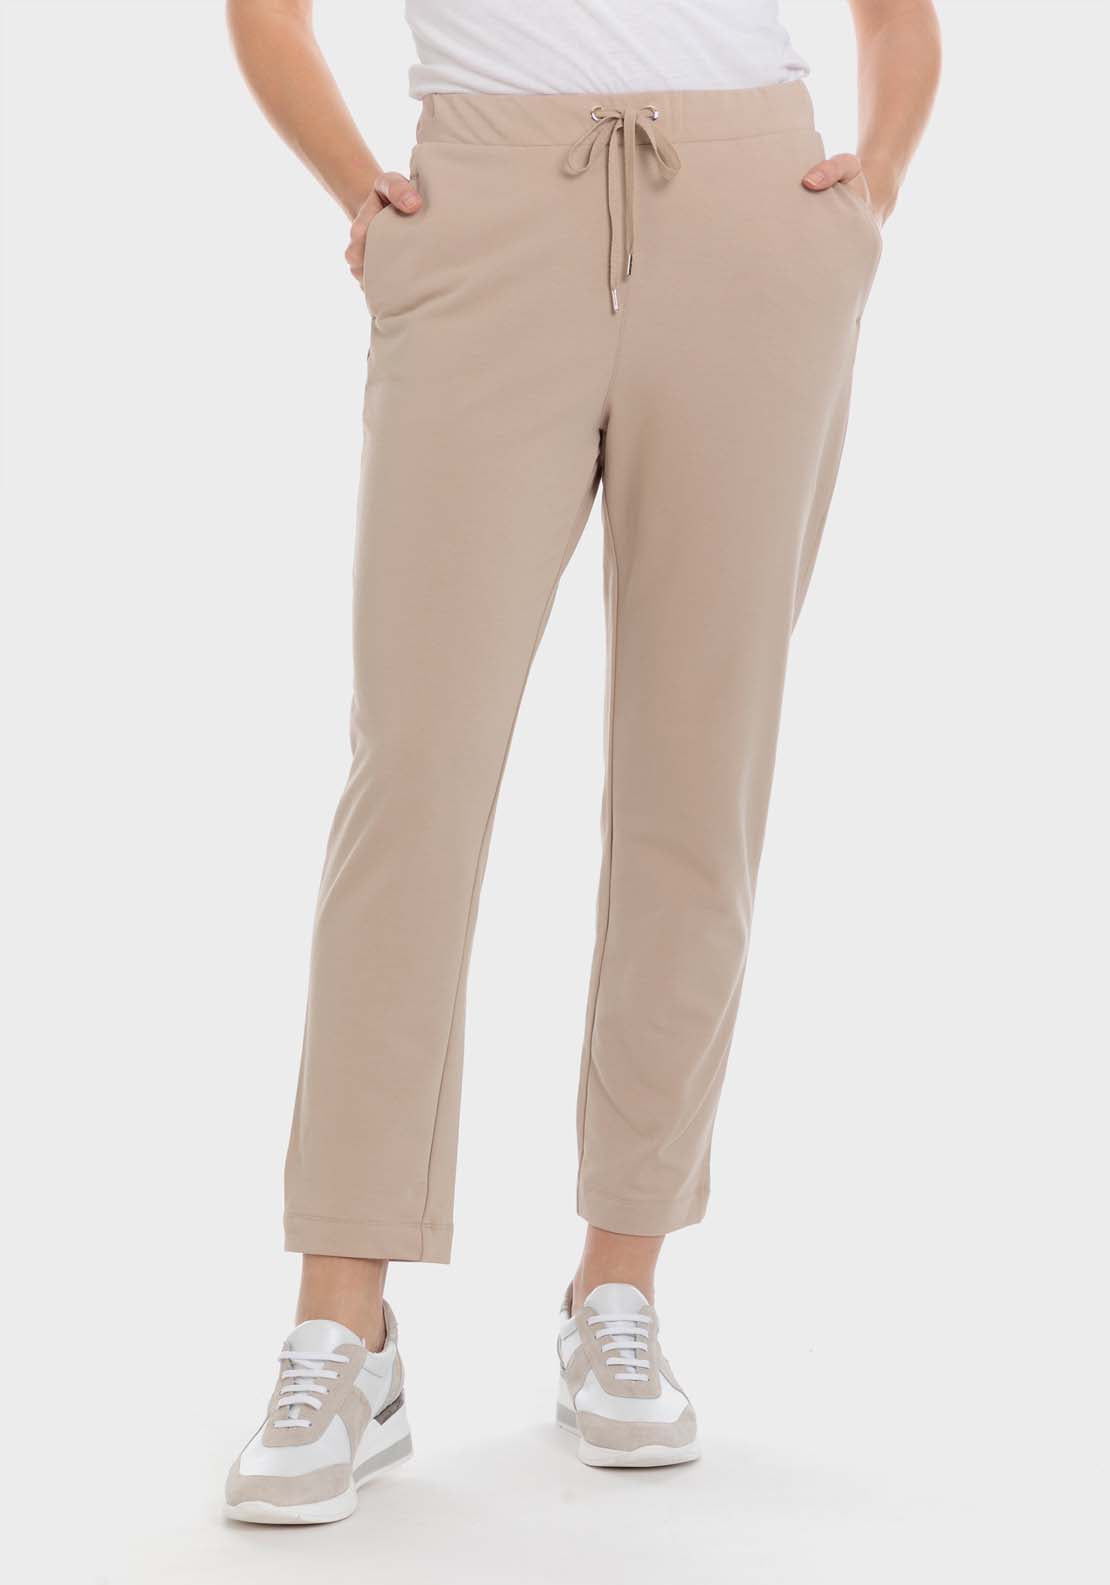 Punt Roma Trousers - Beige 1 Shaws Department Stores